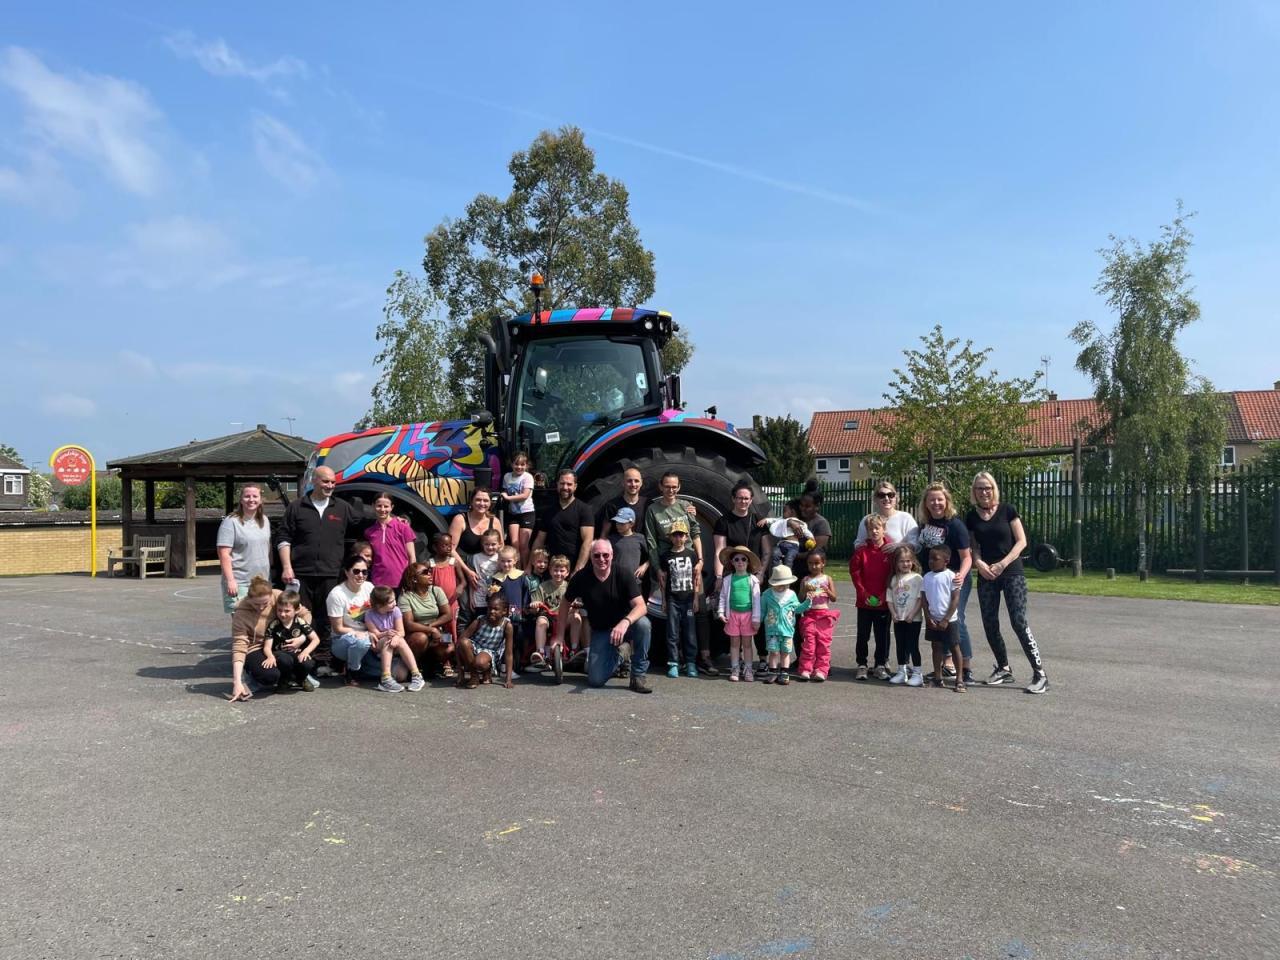 A large group of children and adults stood together in front of a colourful tractor